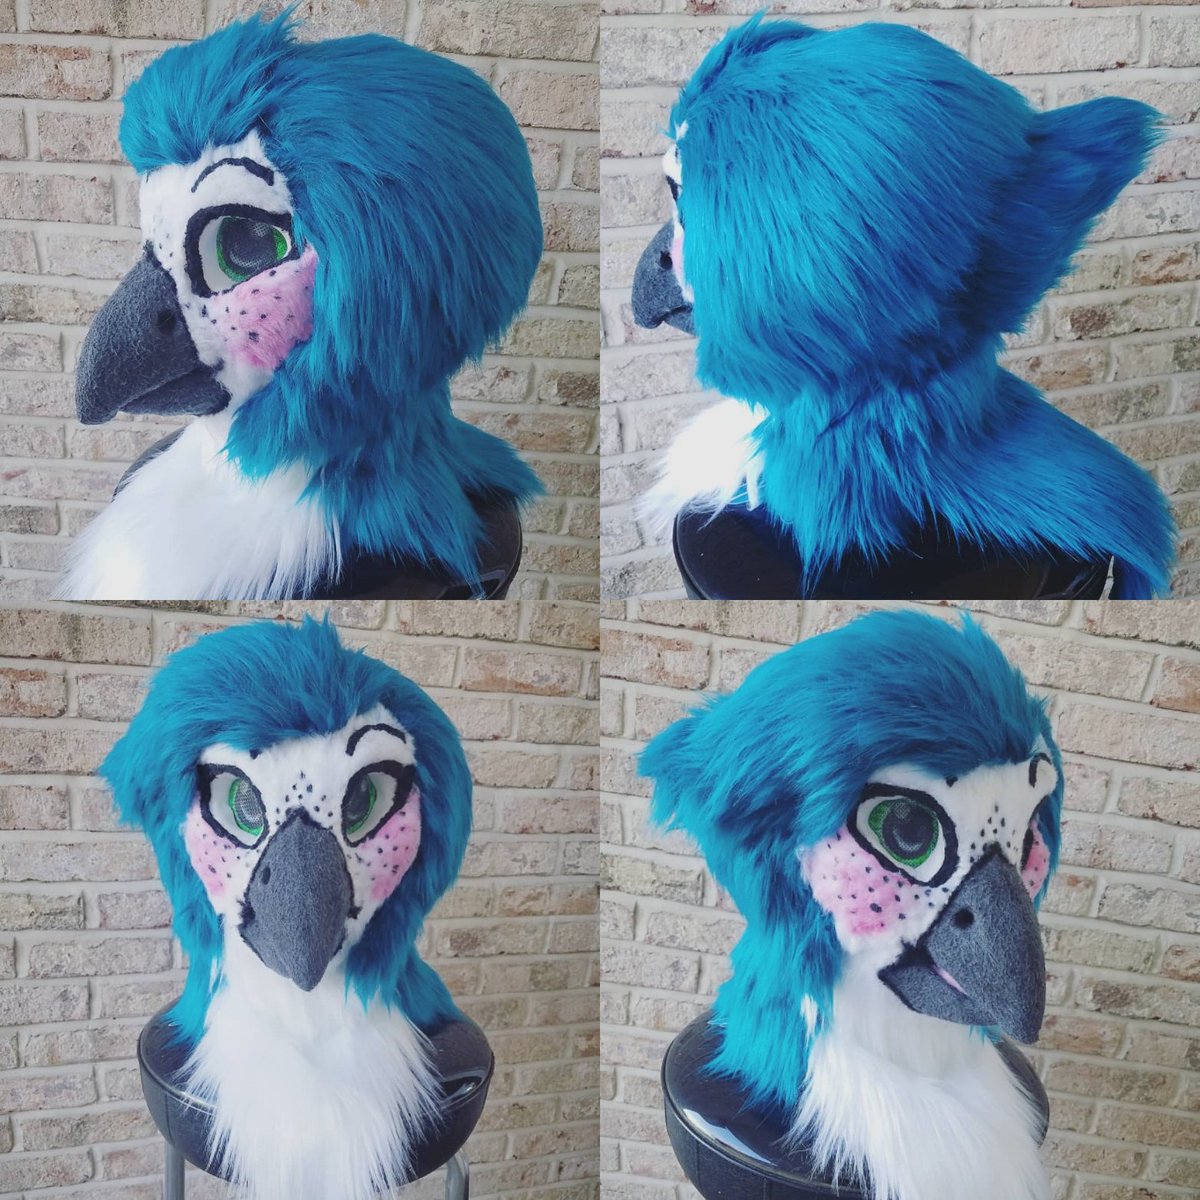 Finished sewing the hands today!Meaning this birdie is done!